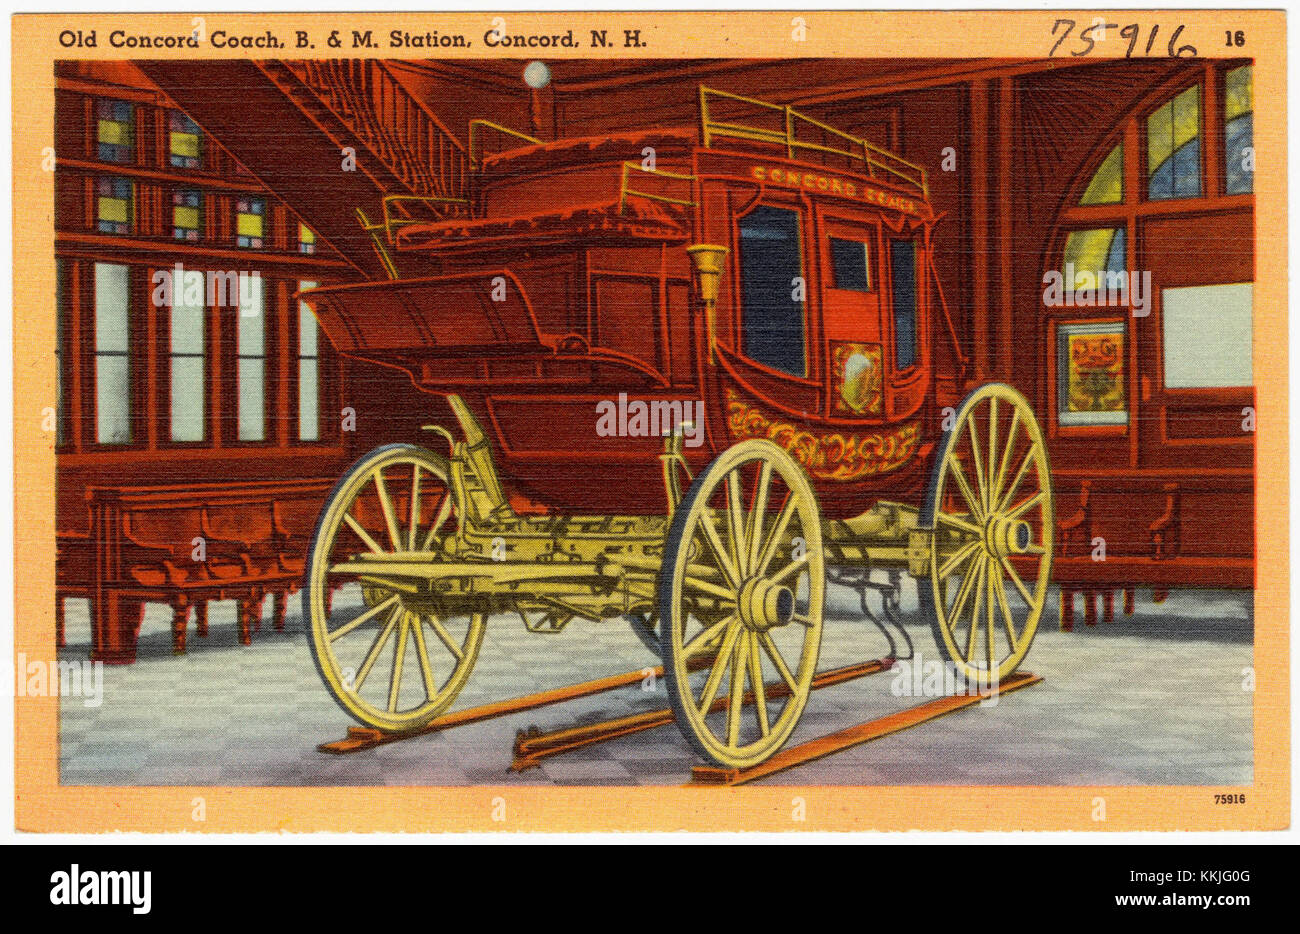 Old Concord Coach, B. and M. Station, Concord, N.H (75916) Stock Photo